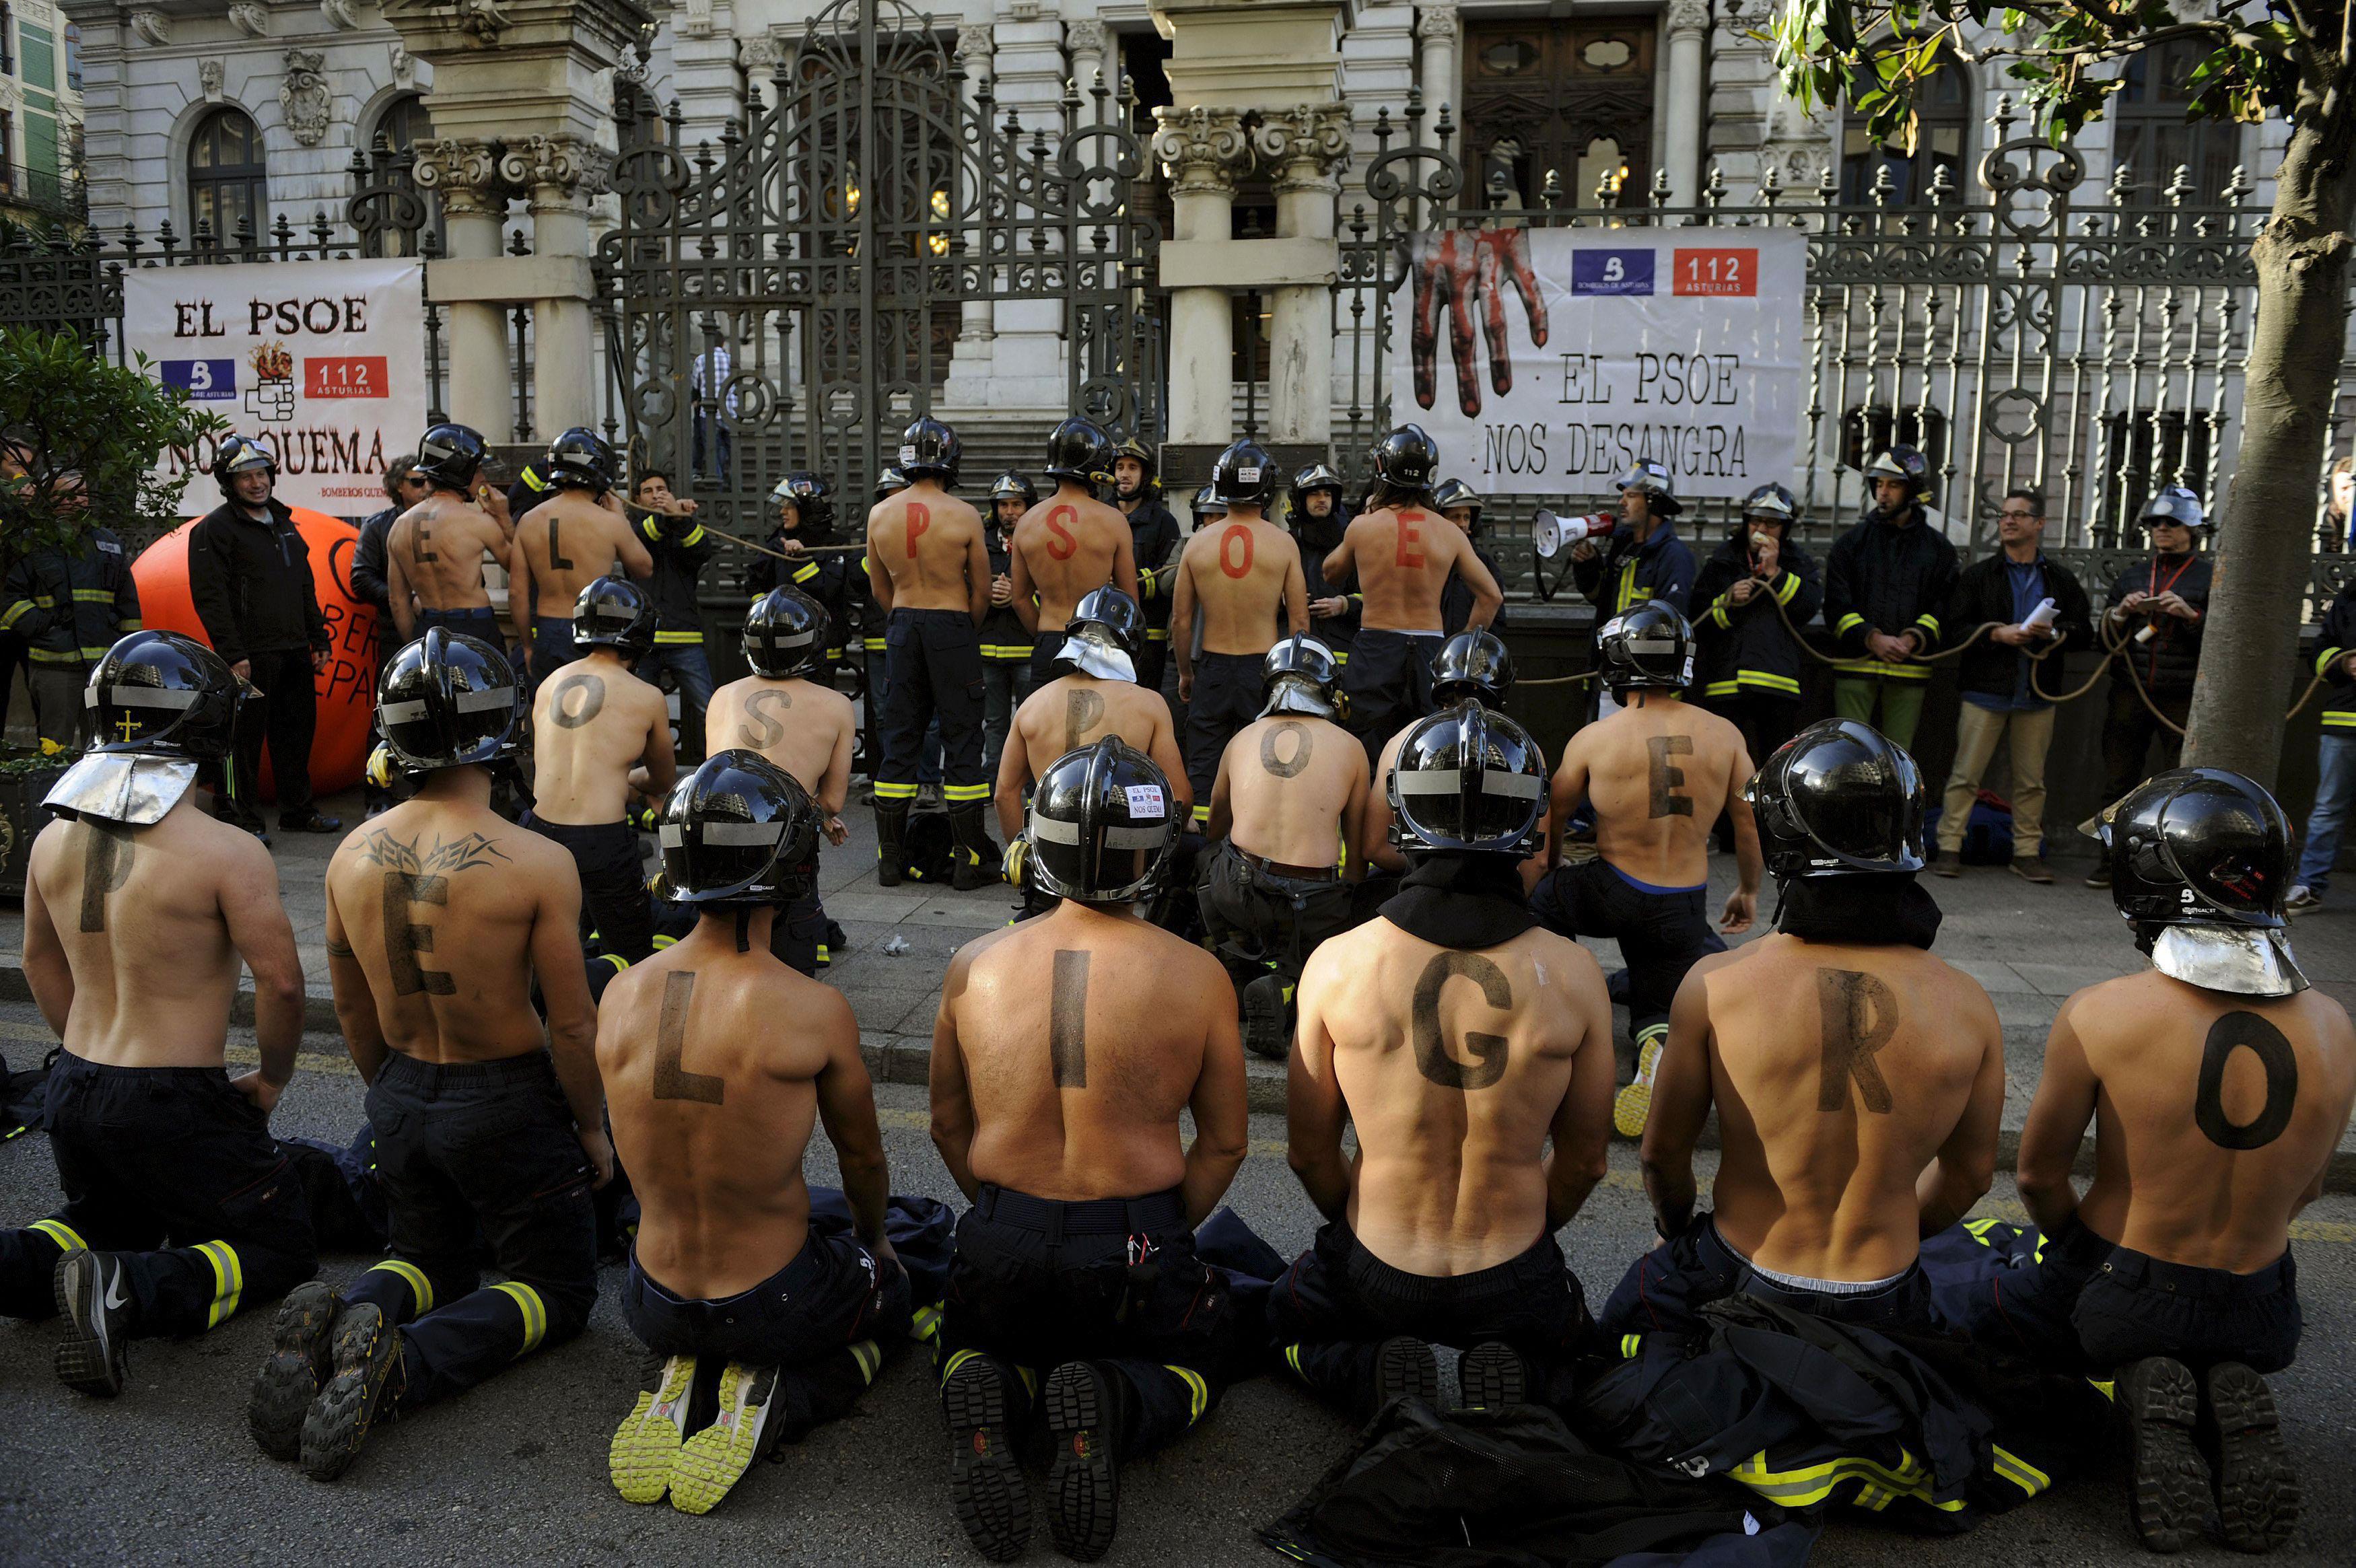 Firefighters take part in a protest in front of the regional parliament of Asturias demanding better